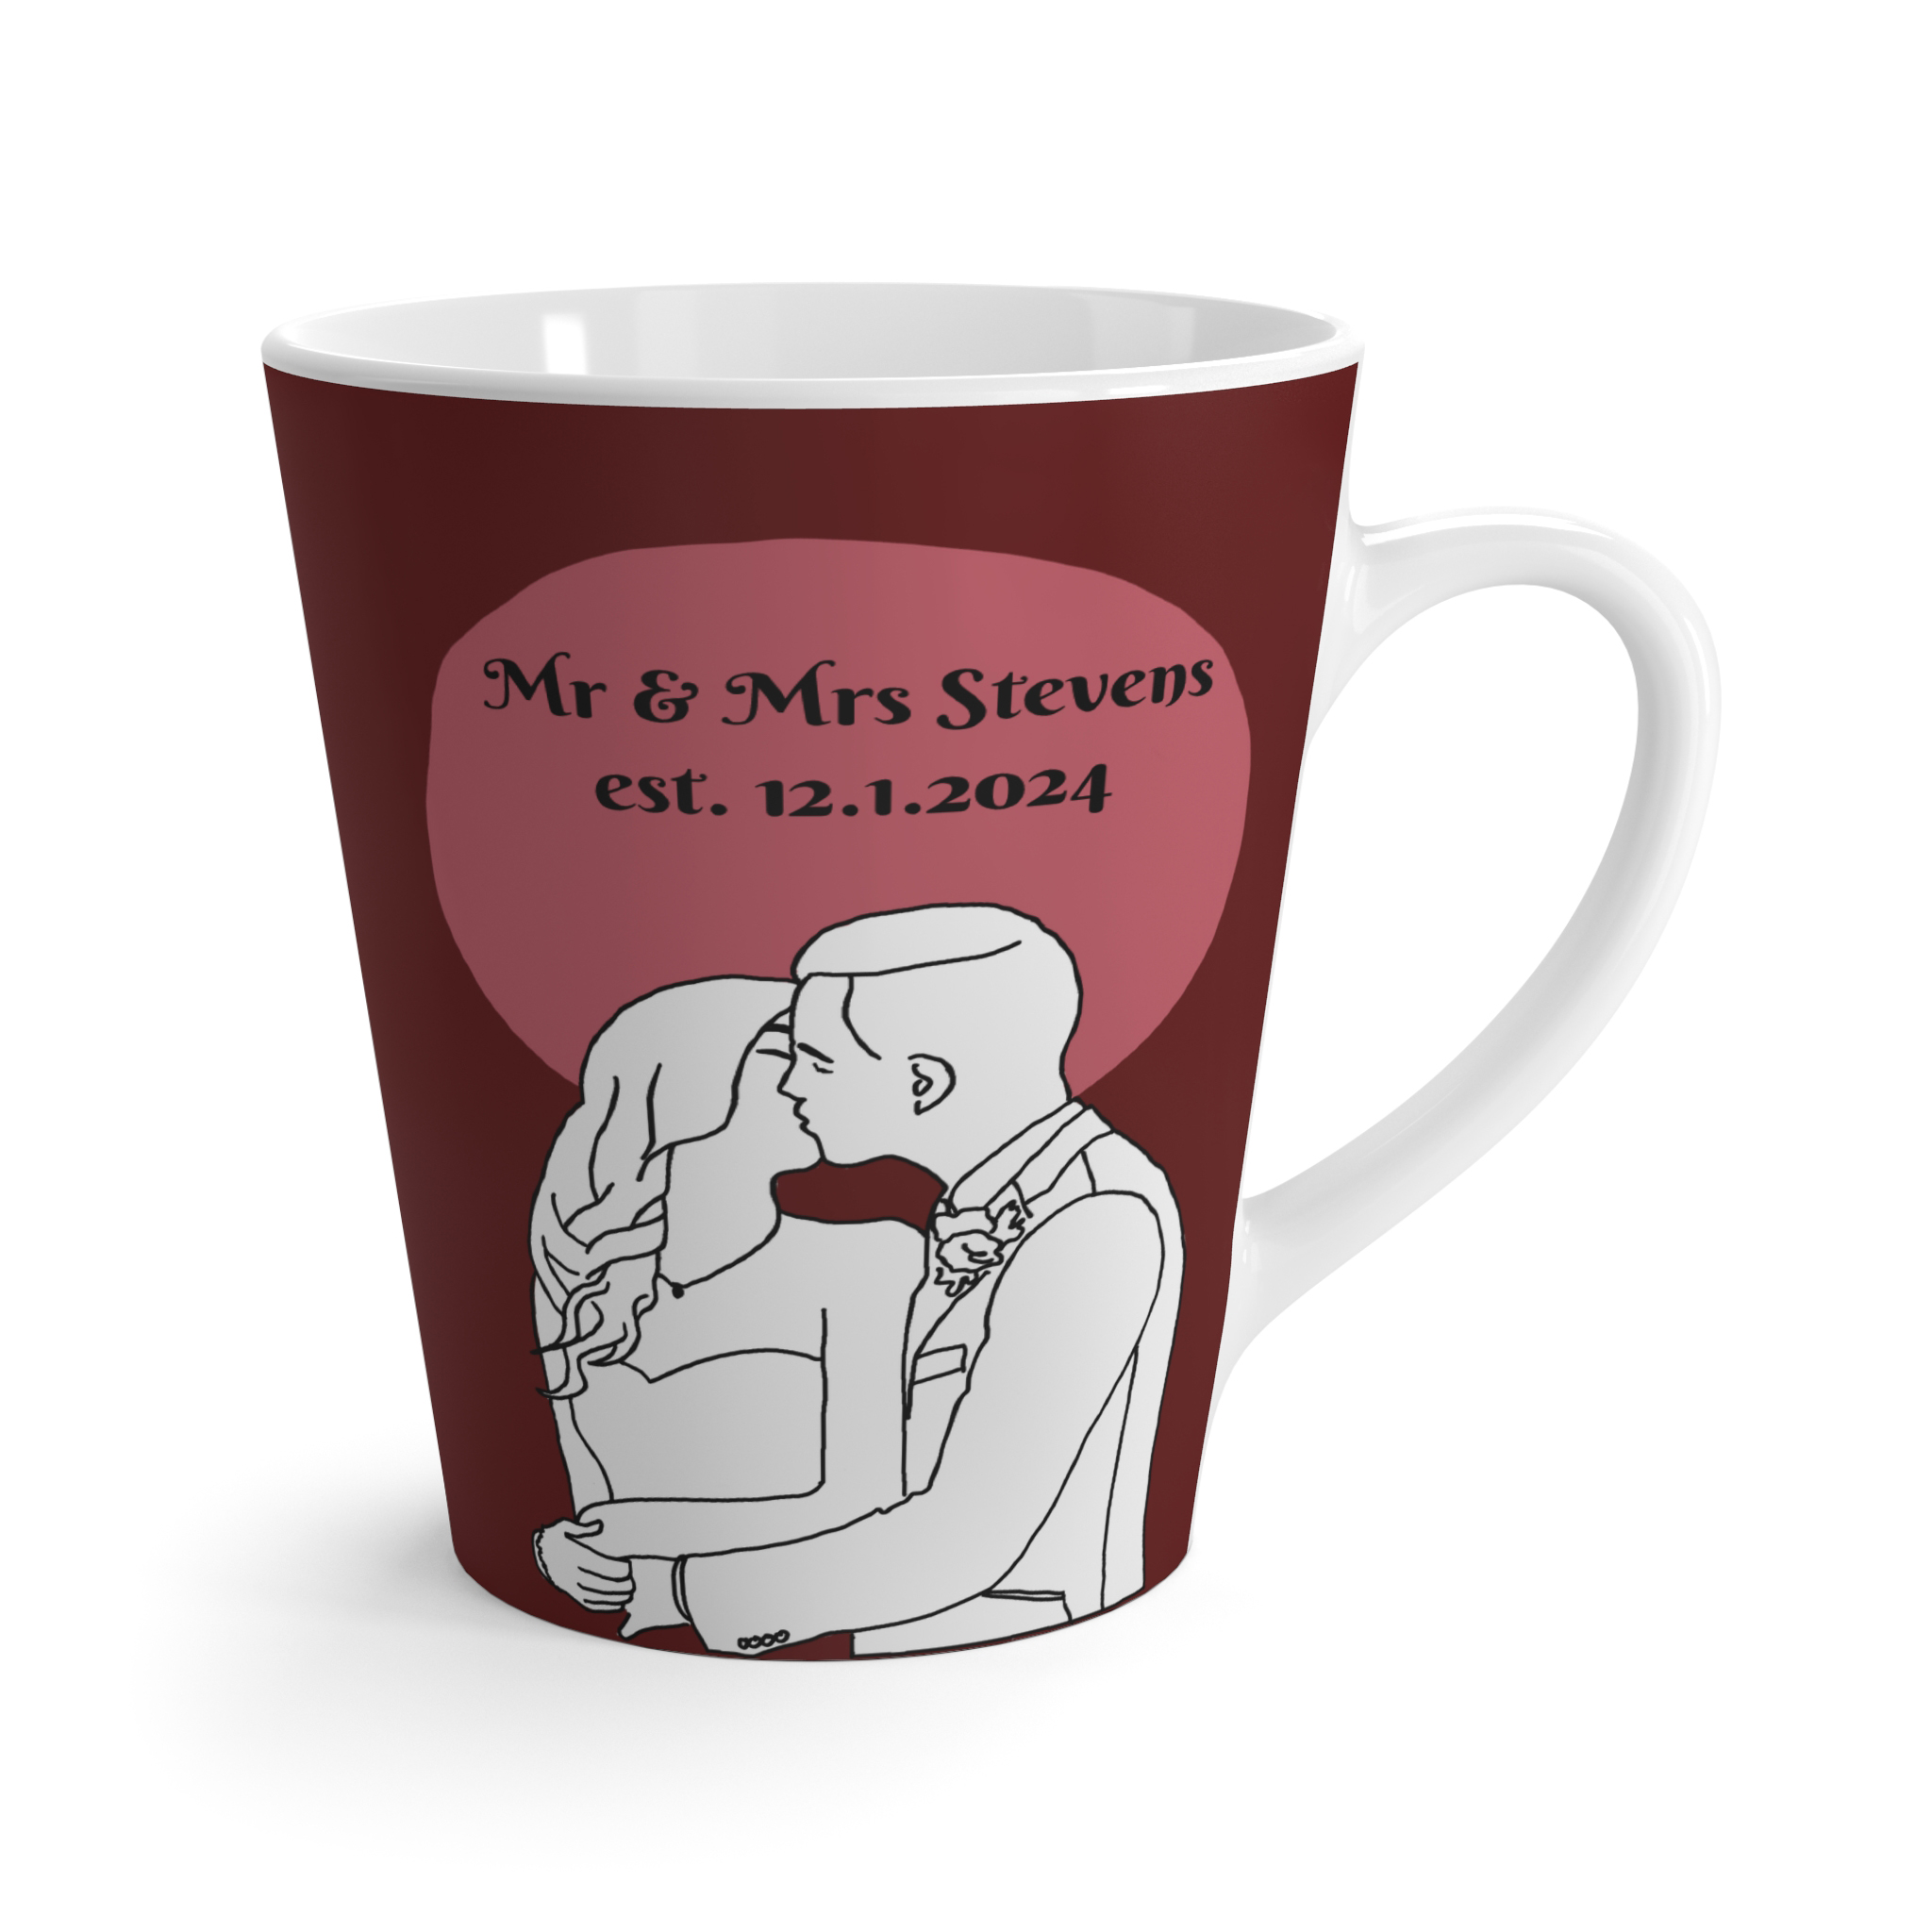 kissing wedding couple line art portrait illustration on berry colored mug with name and date